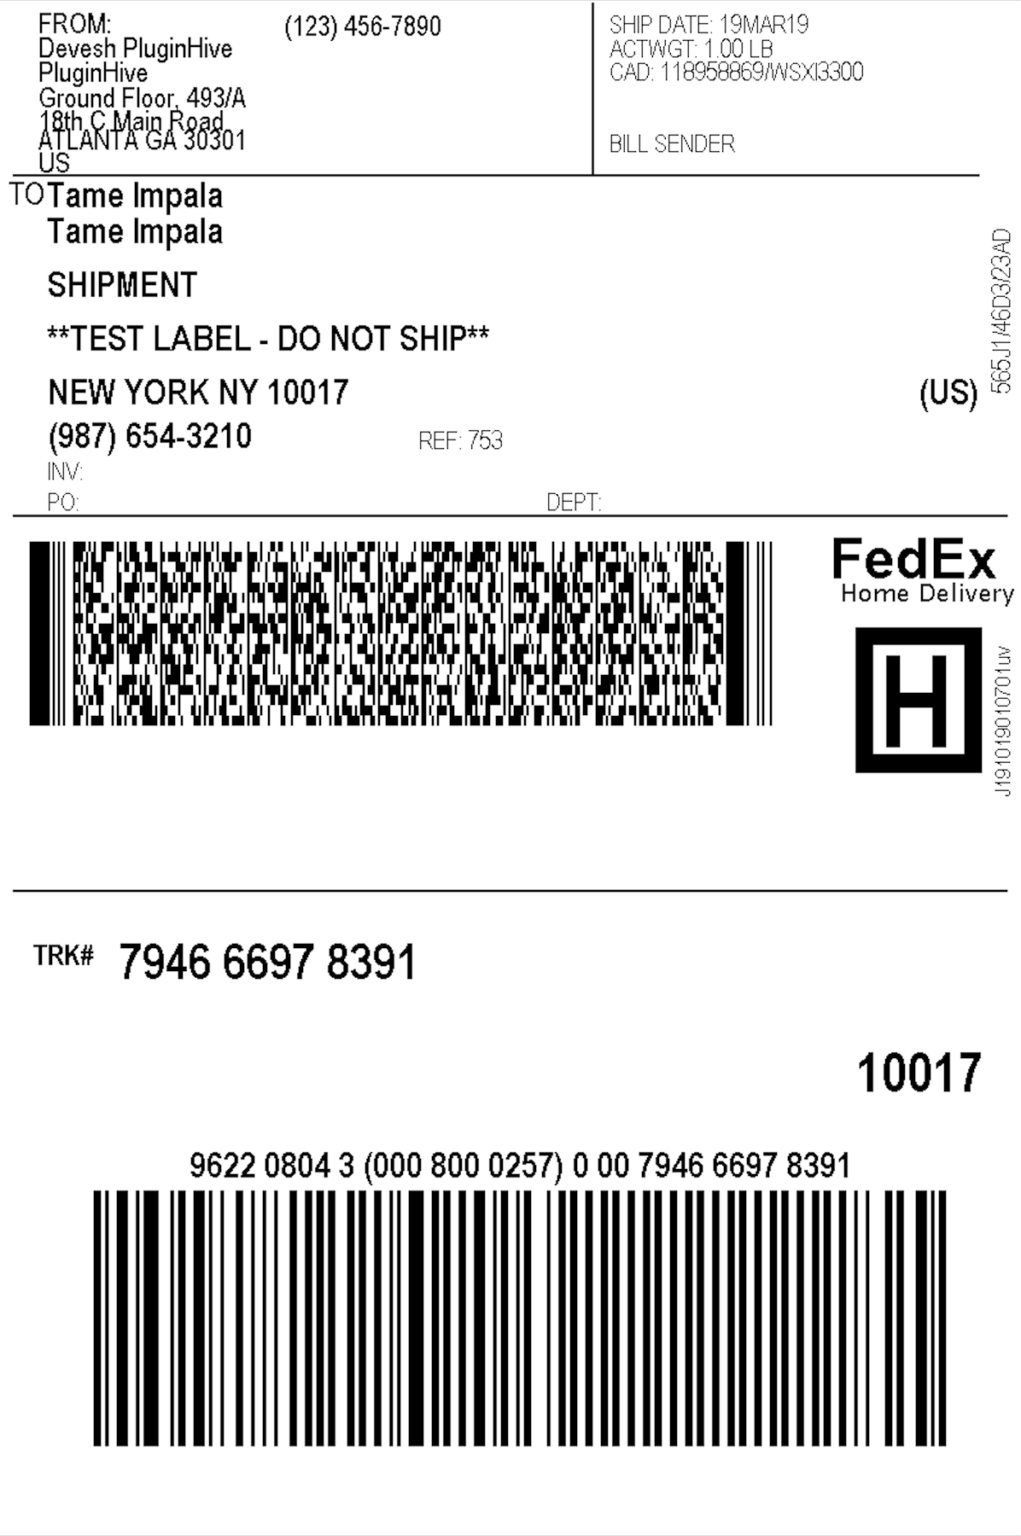 fedex ground tracking numbers